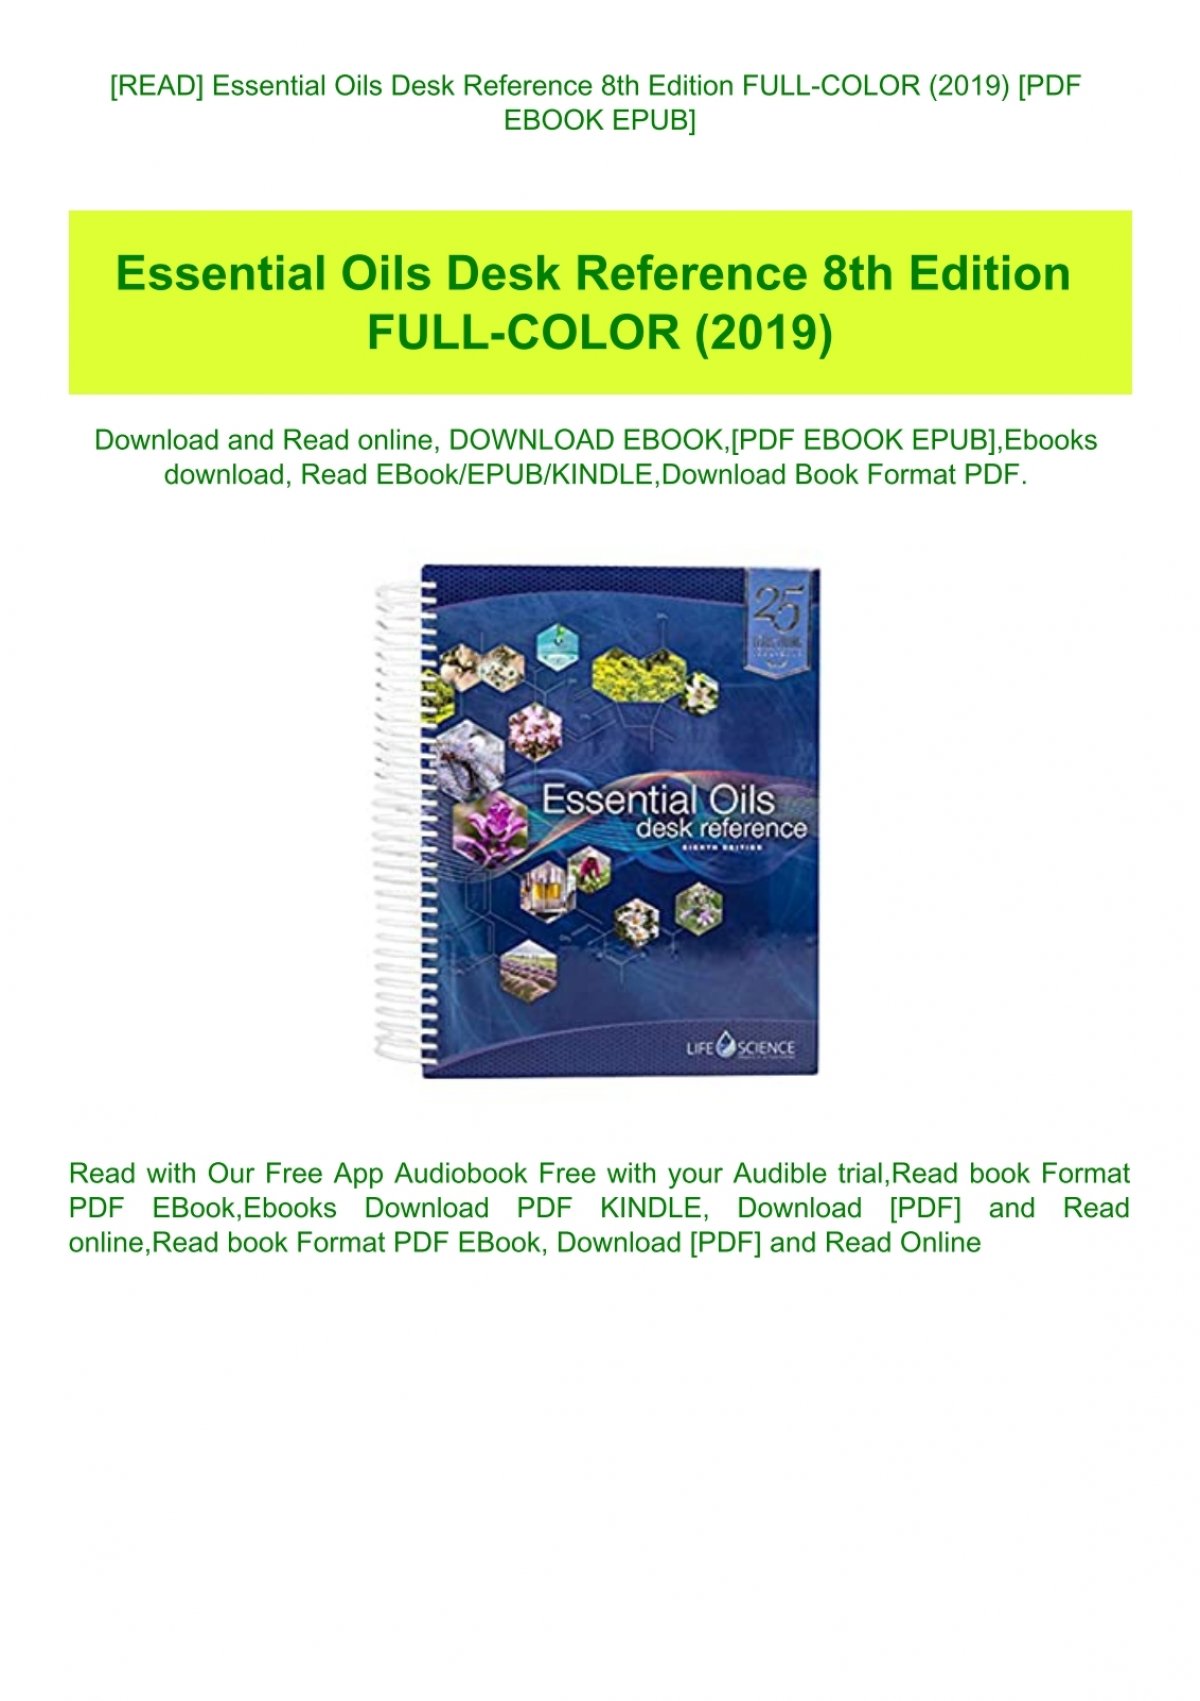 Read Essential Oils Desk Reference 8th Edition Full Color 2019